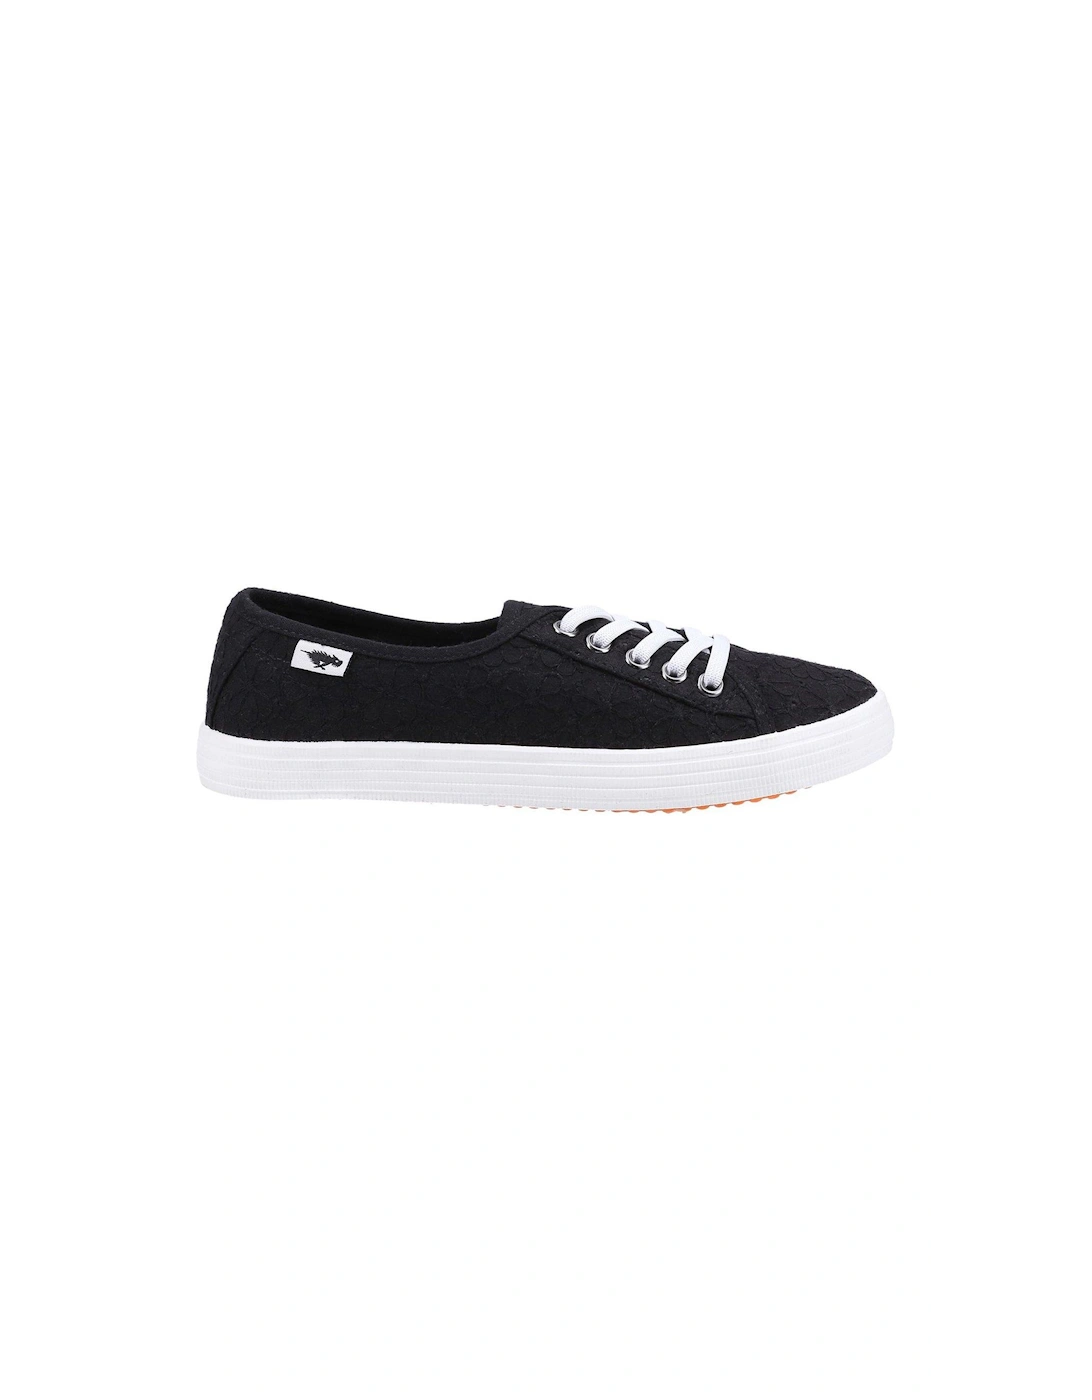 Chow Chow Plimsolls - Black, 2 of 1